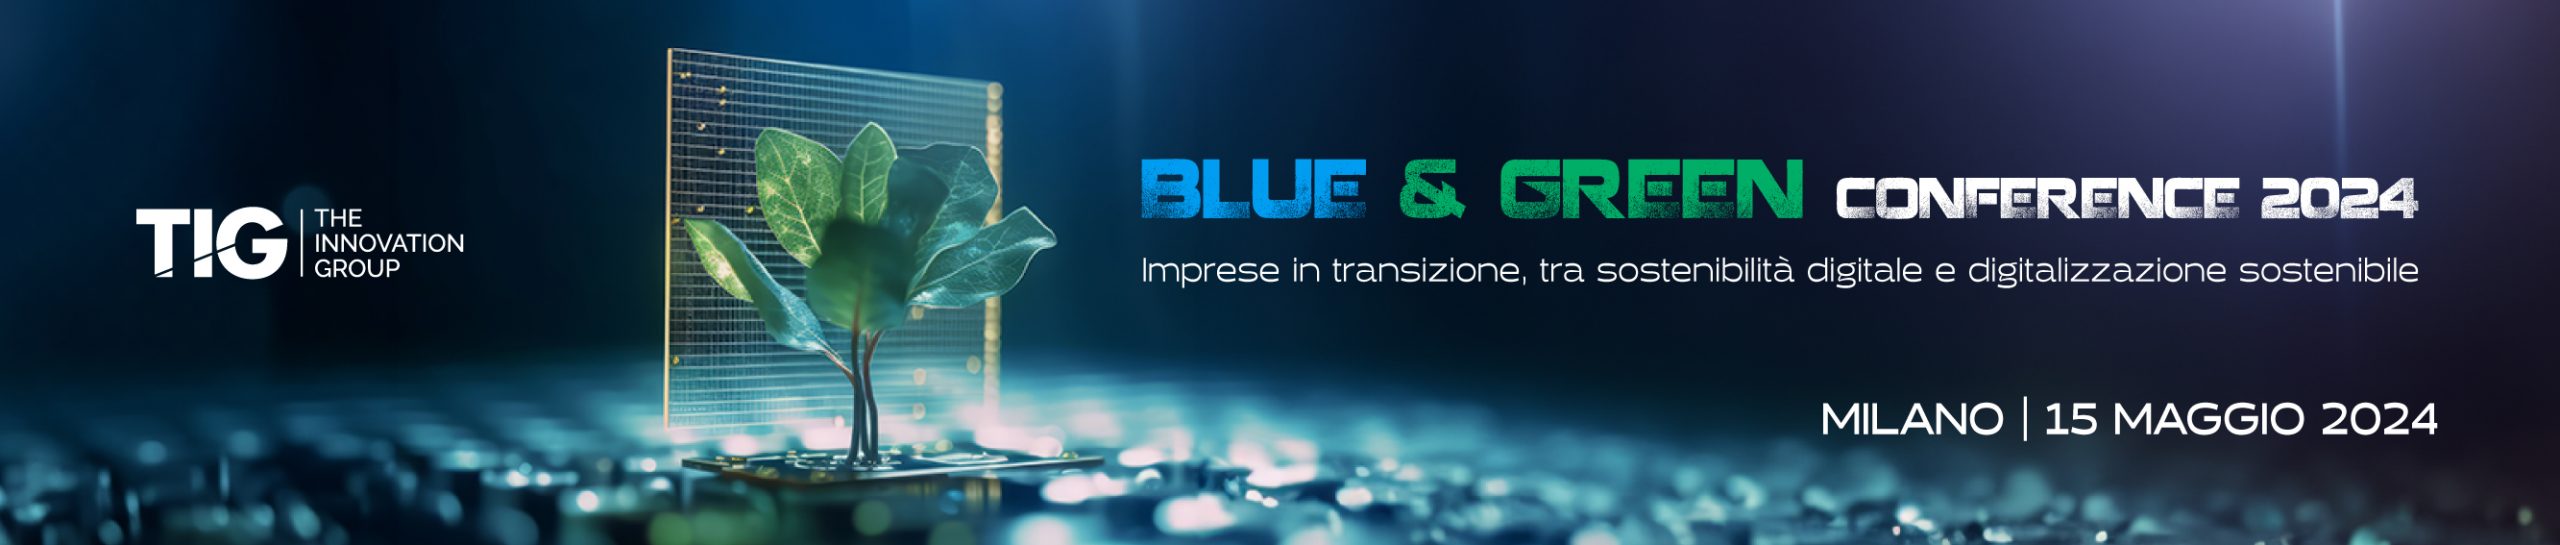 banner BLUE & GREEN CONFERENCE 2024